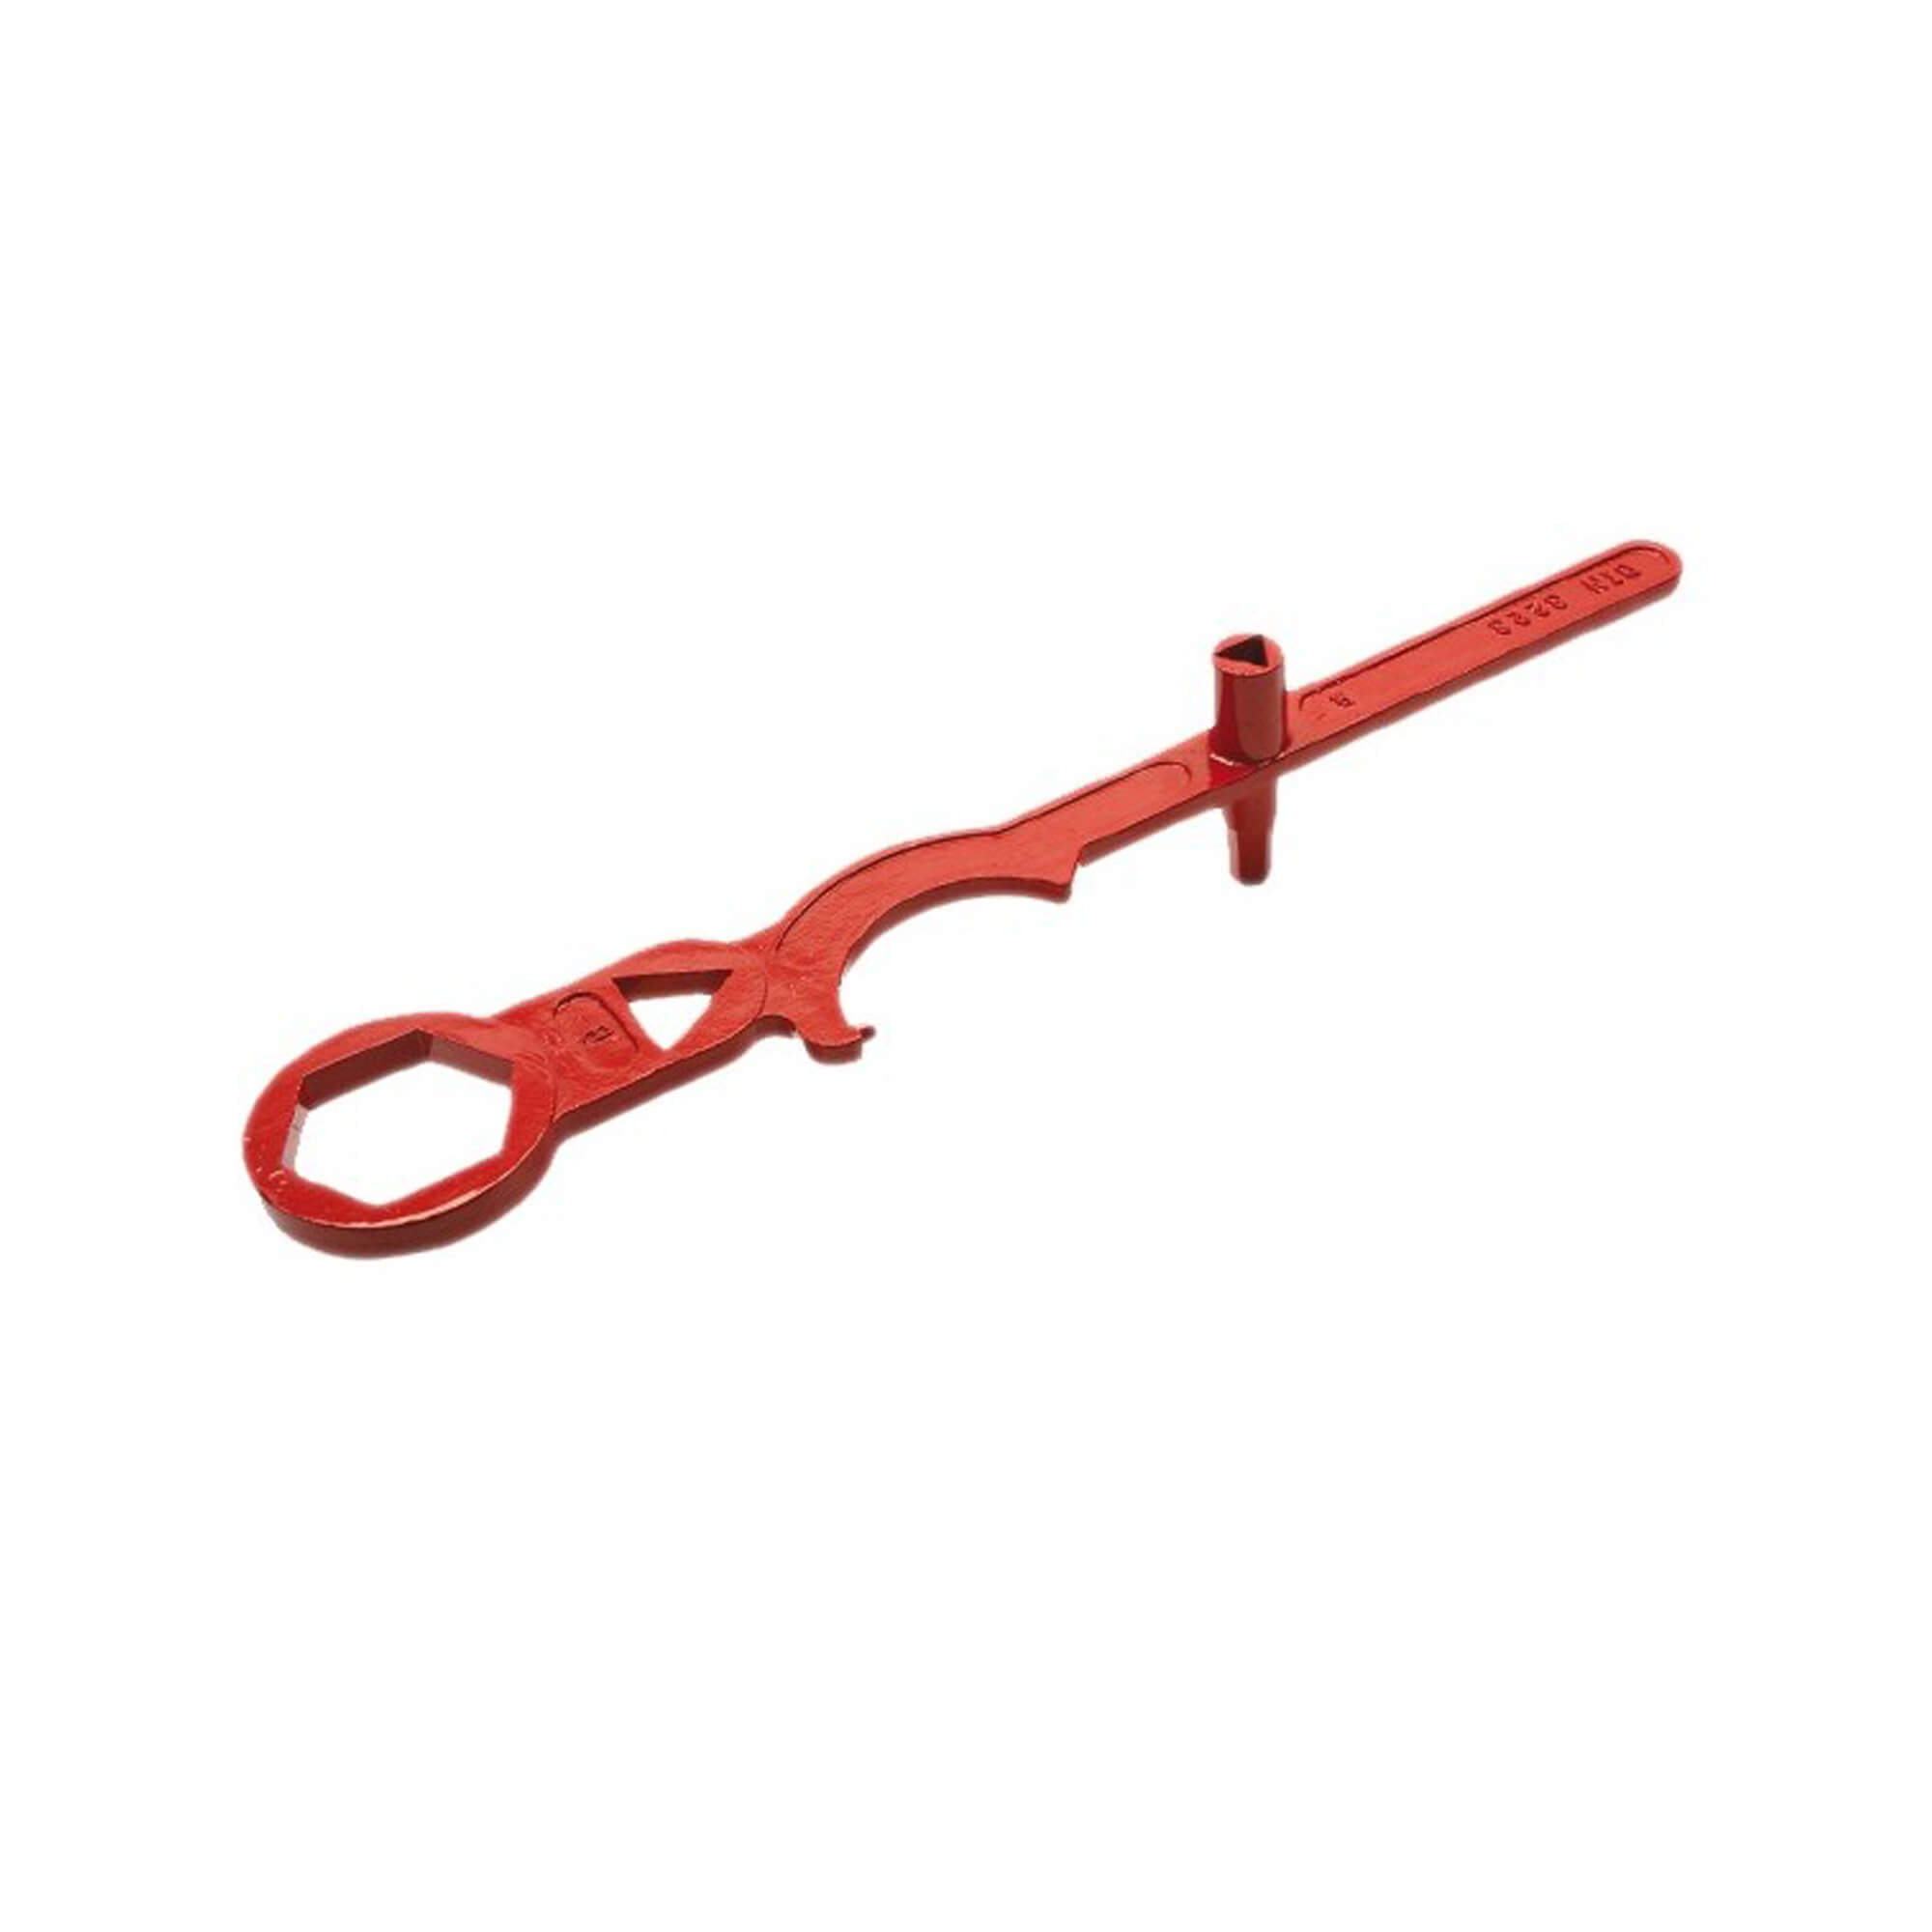 Universal surface hydrant wrench, type B,